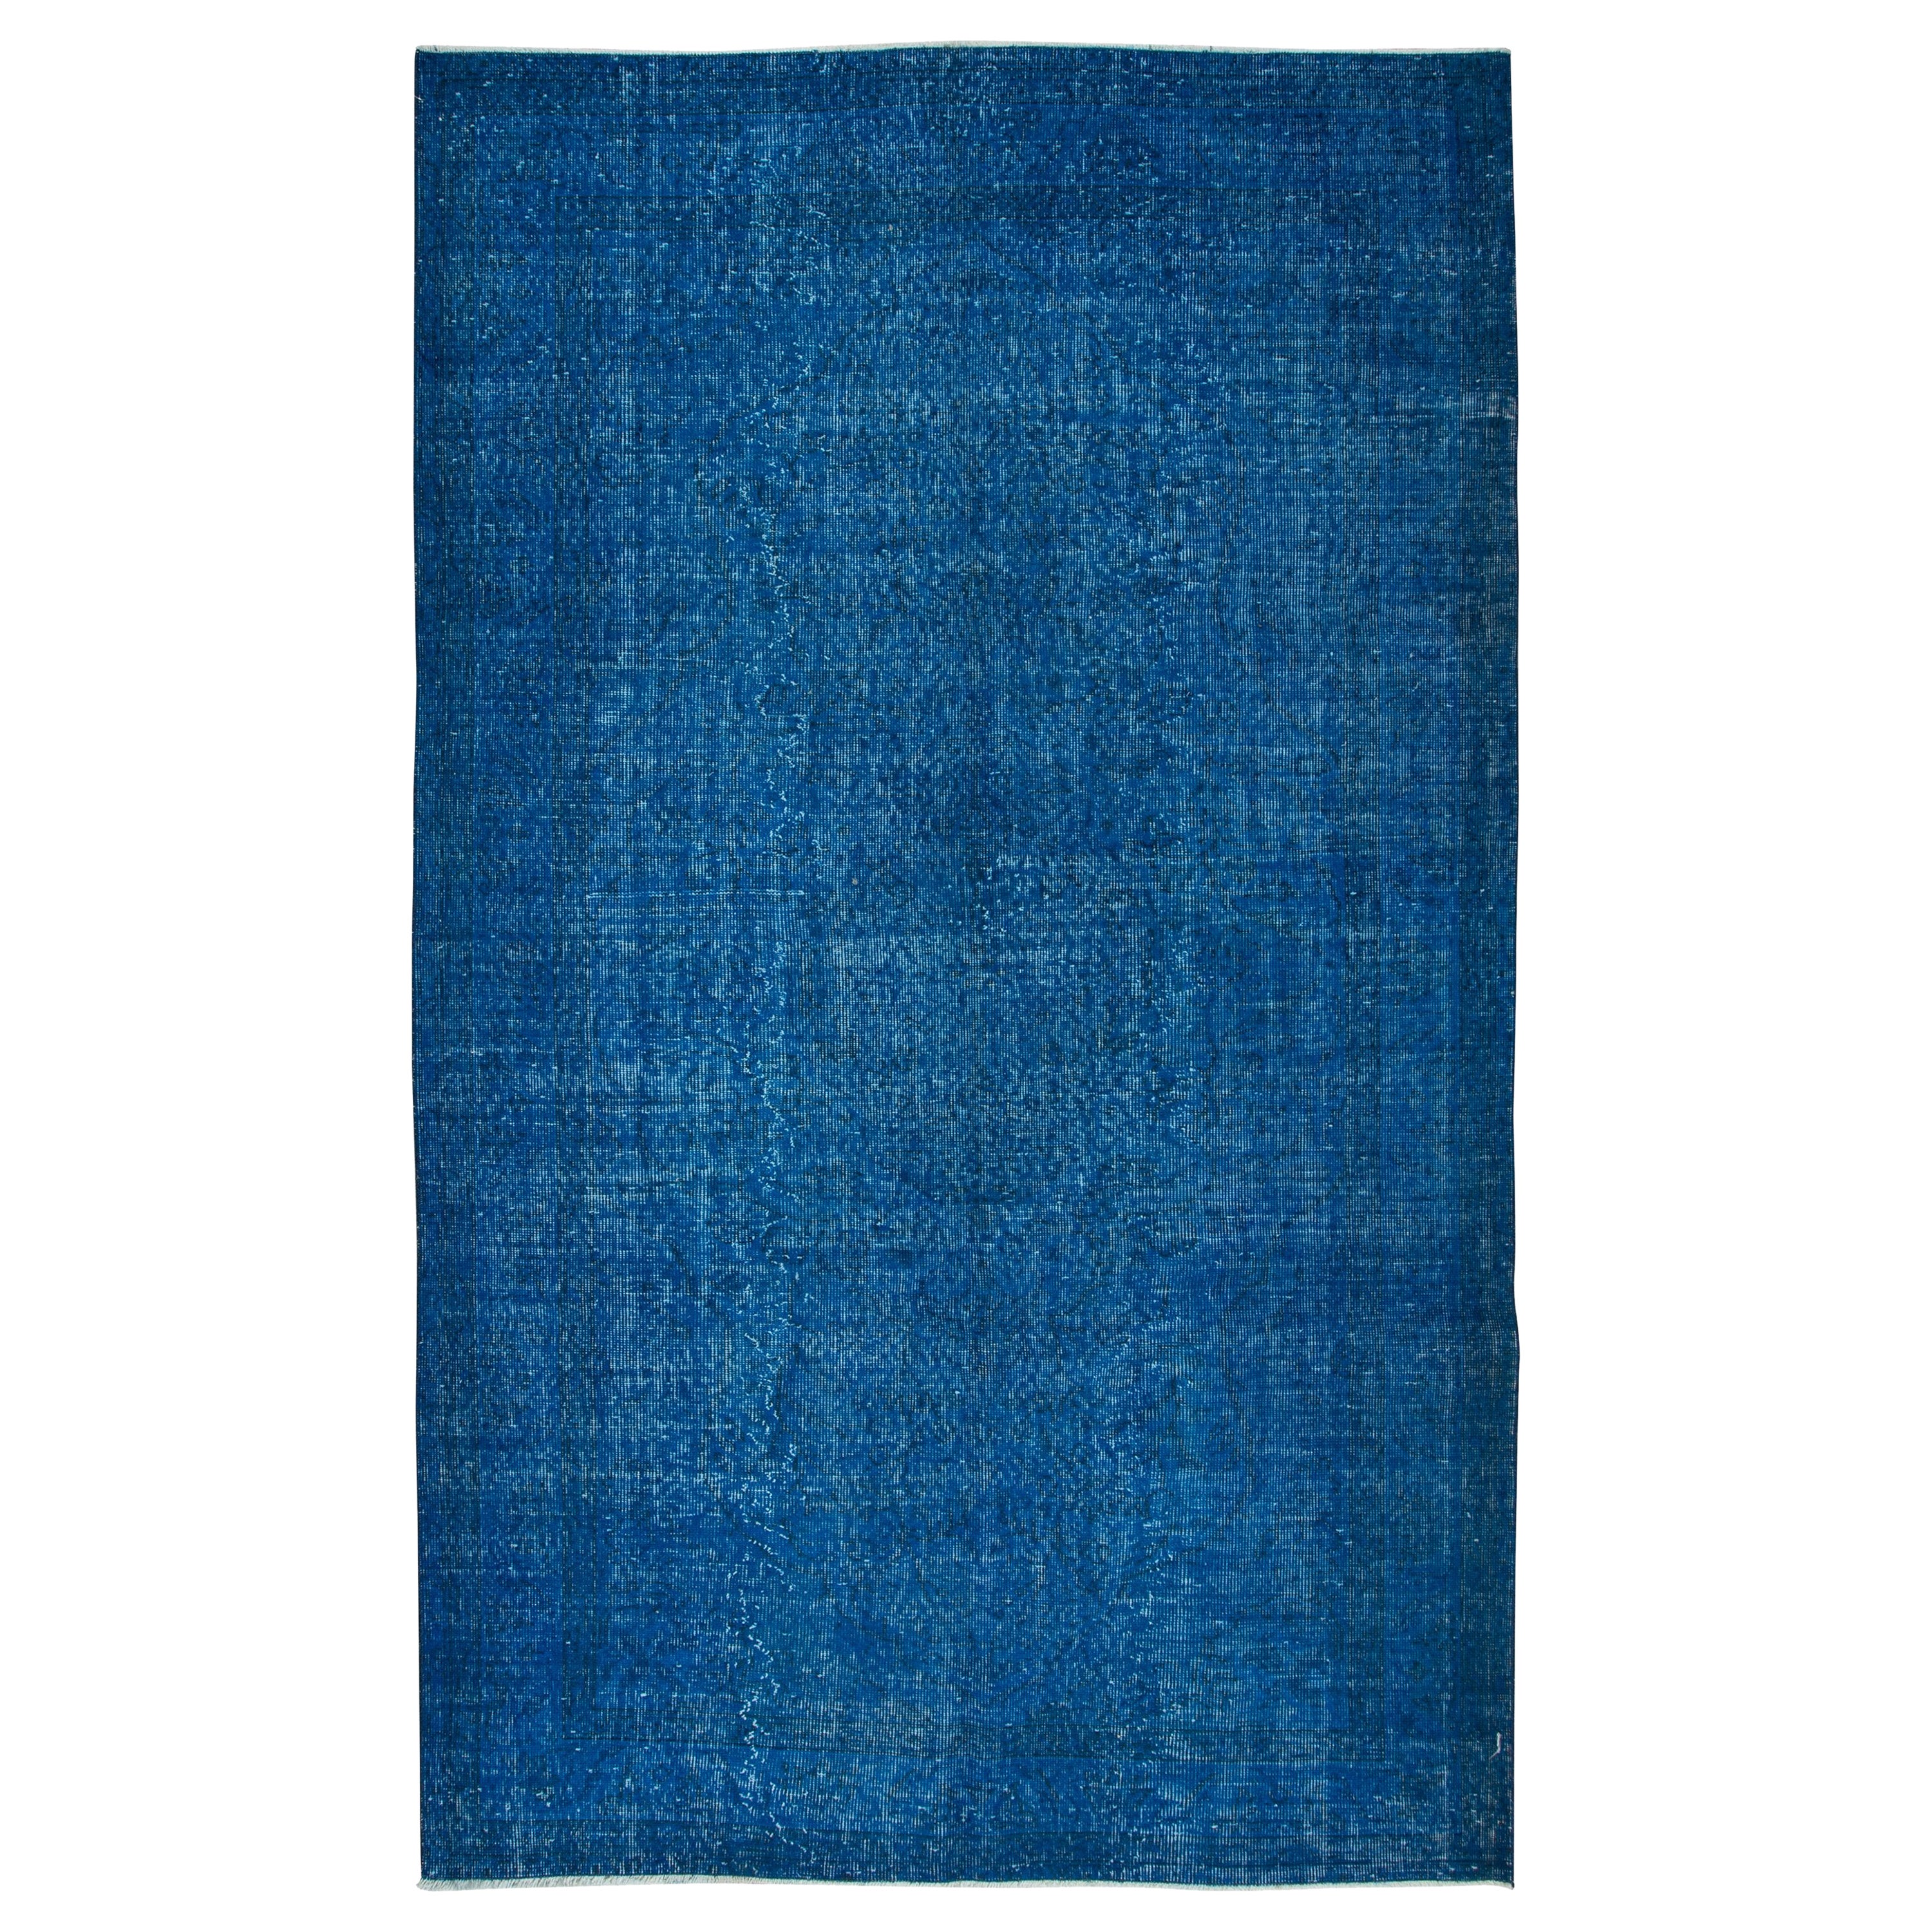 5.3x8.8 Ft Handmade Turkish Wool Area Rug in Solid Blue 4 Modern Interiors For Sale